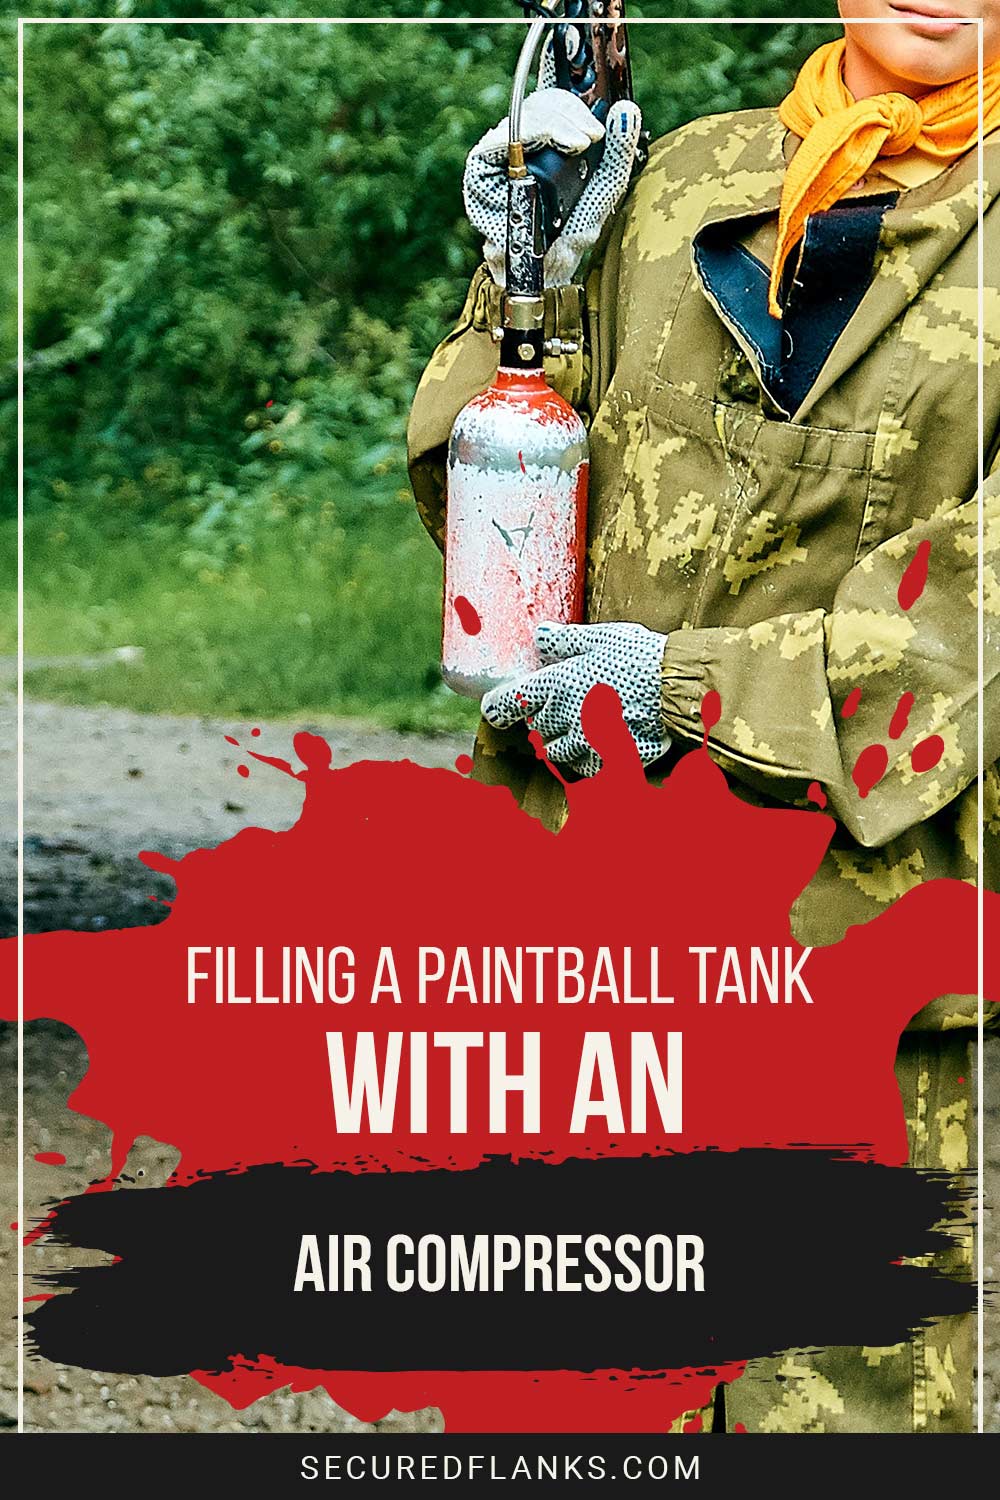 Person holding an air compressor - Filling a Paintball Tank with one.